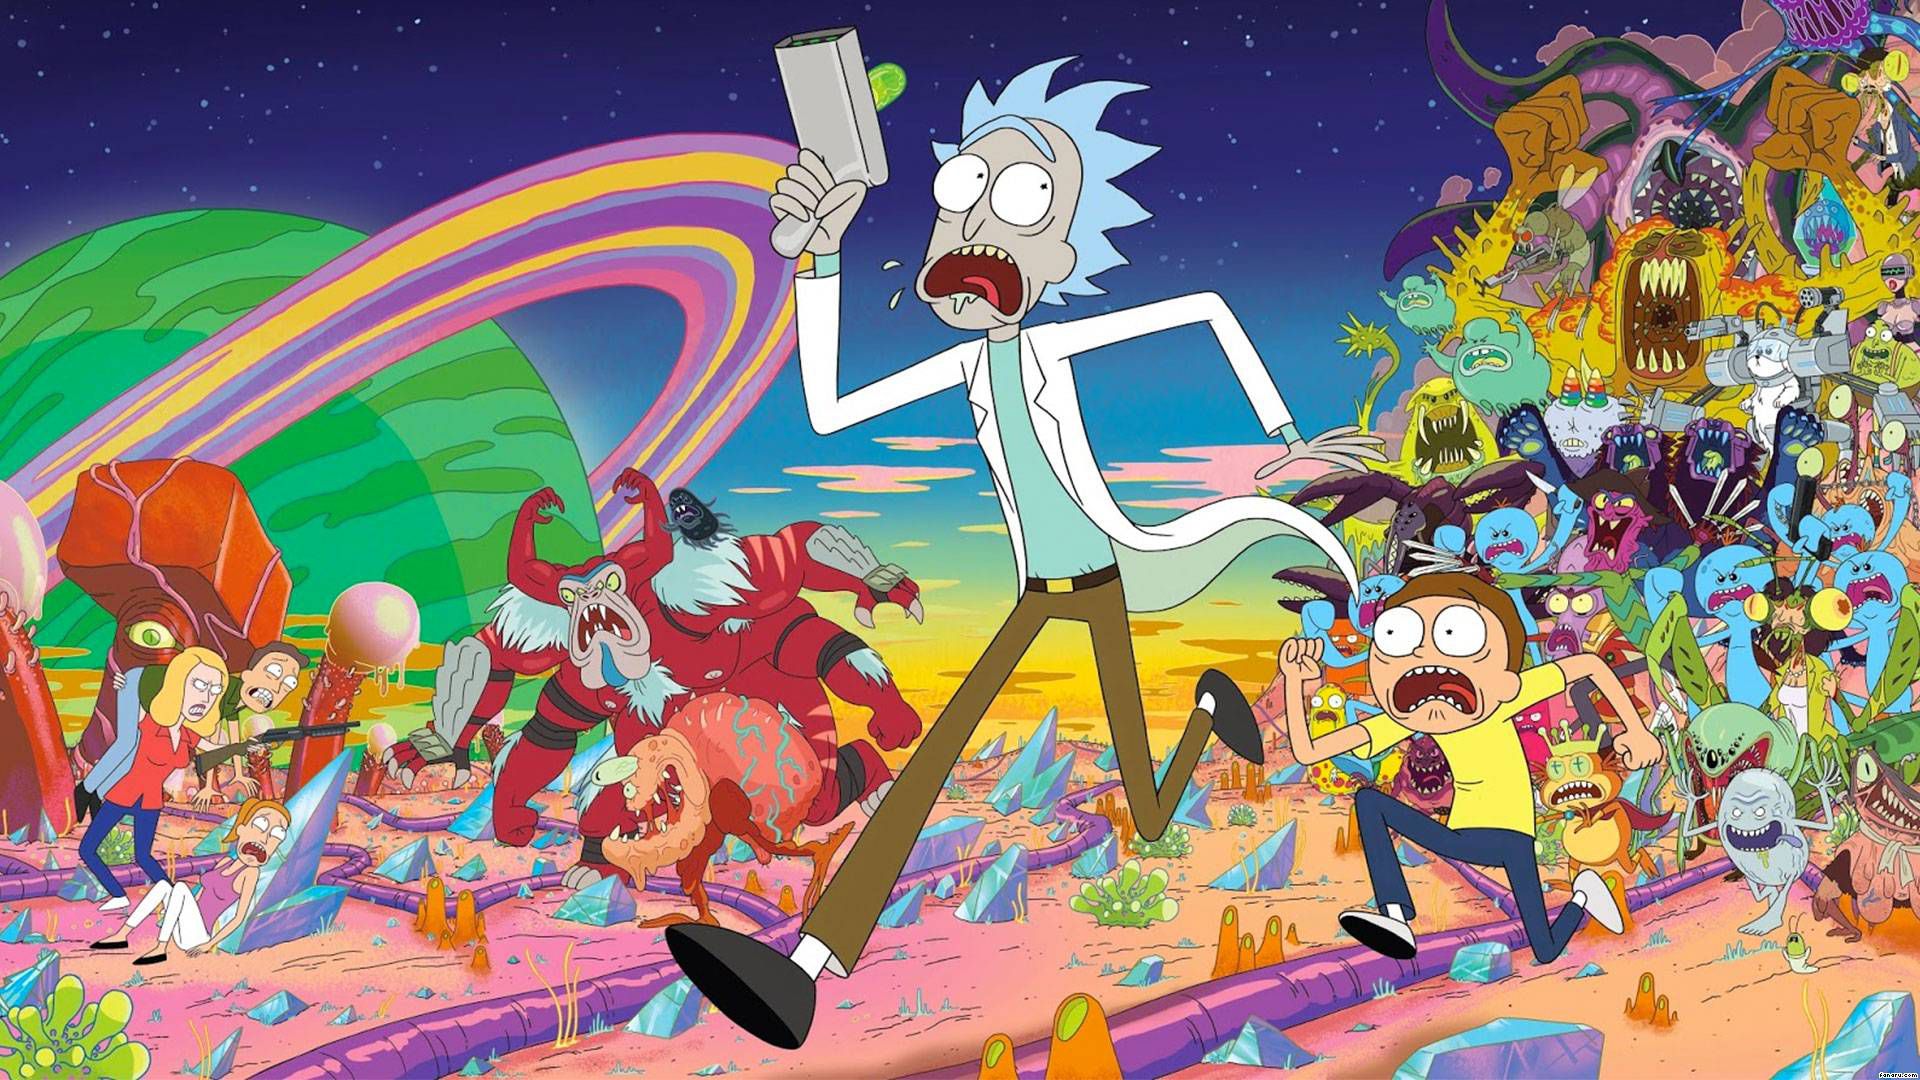 Rick and Morty, the geniuses (madness) of the series analyzed scientifically